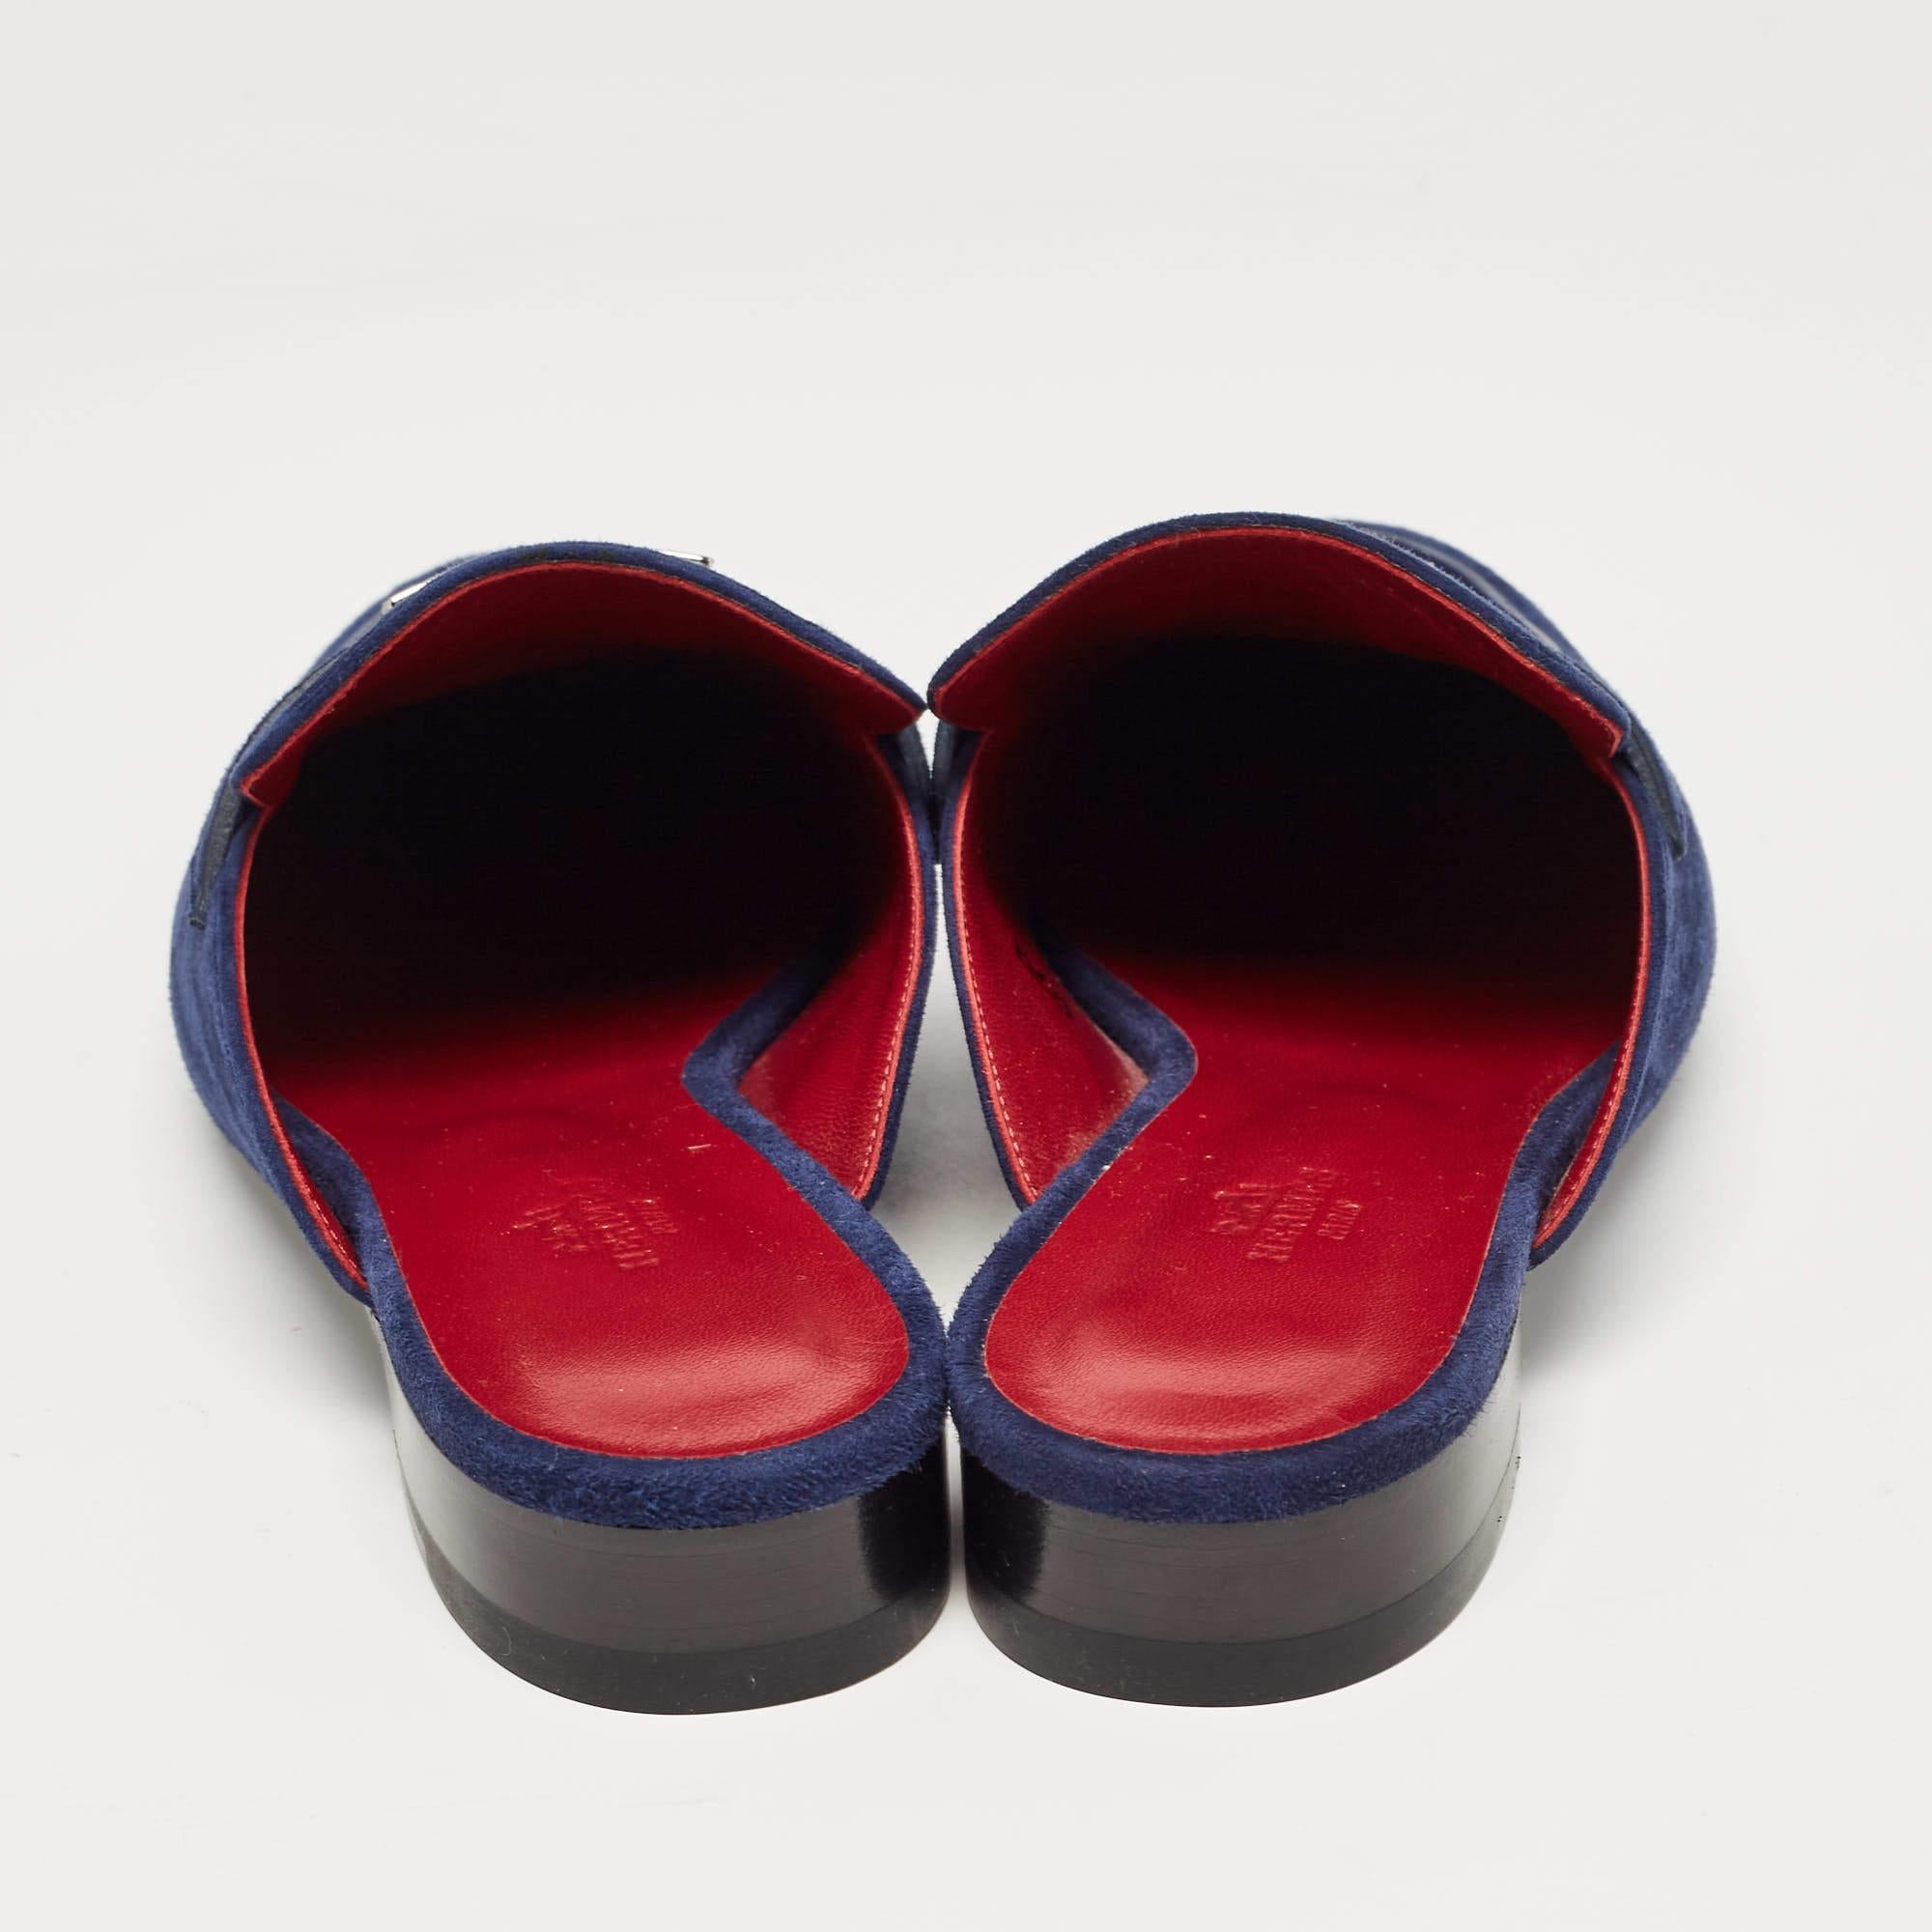 Hermes Navy Blue Suede Trocadero Mules Size 39.5 For Sale 2